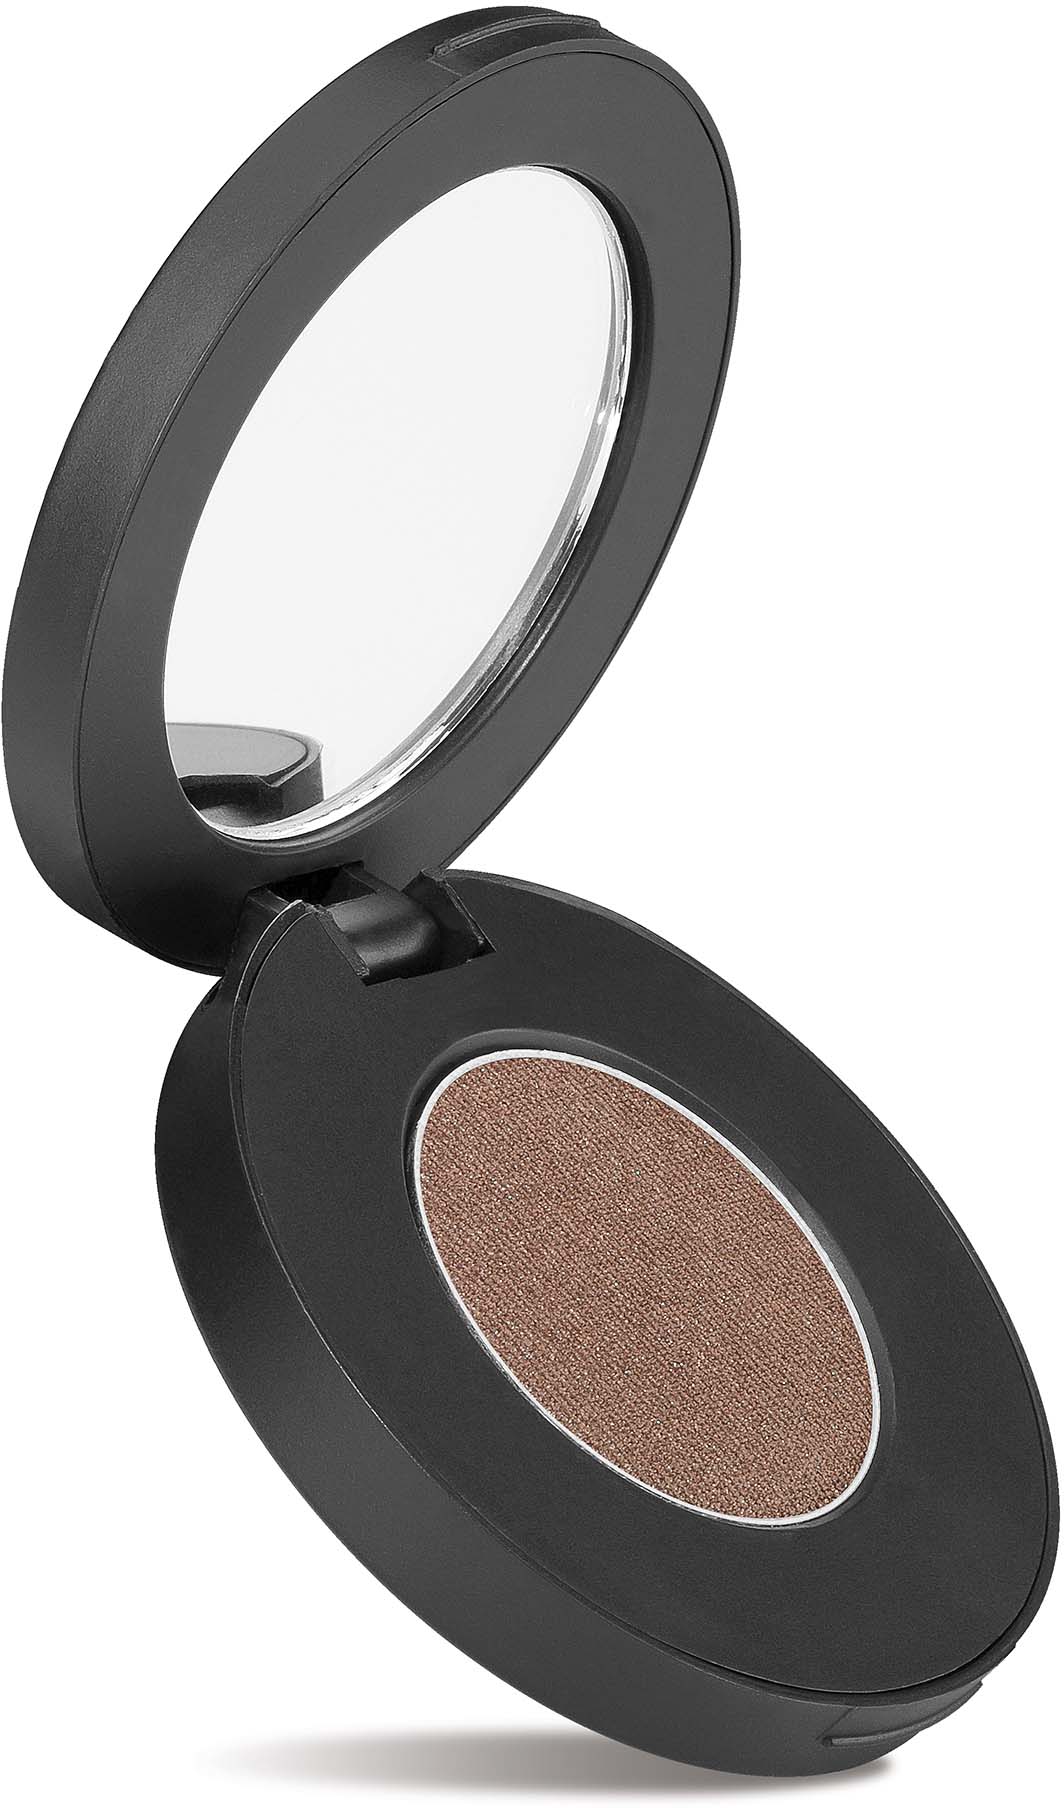 Youngblood Pressed Individual Eyeshadow 08 Glided